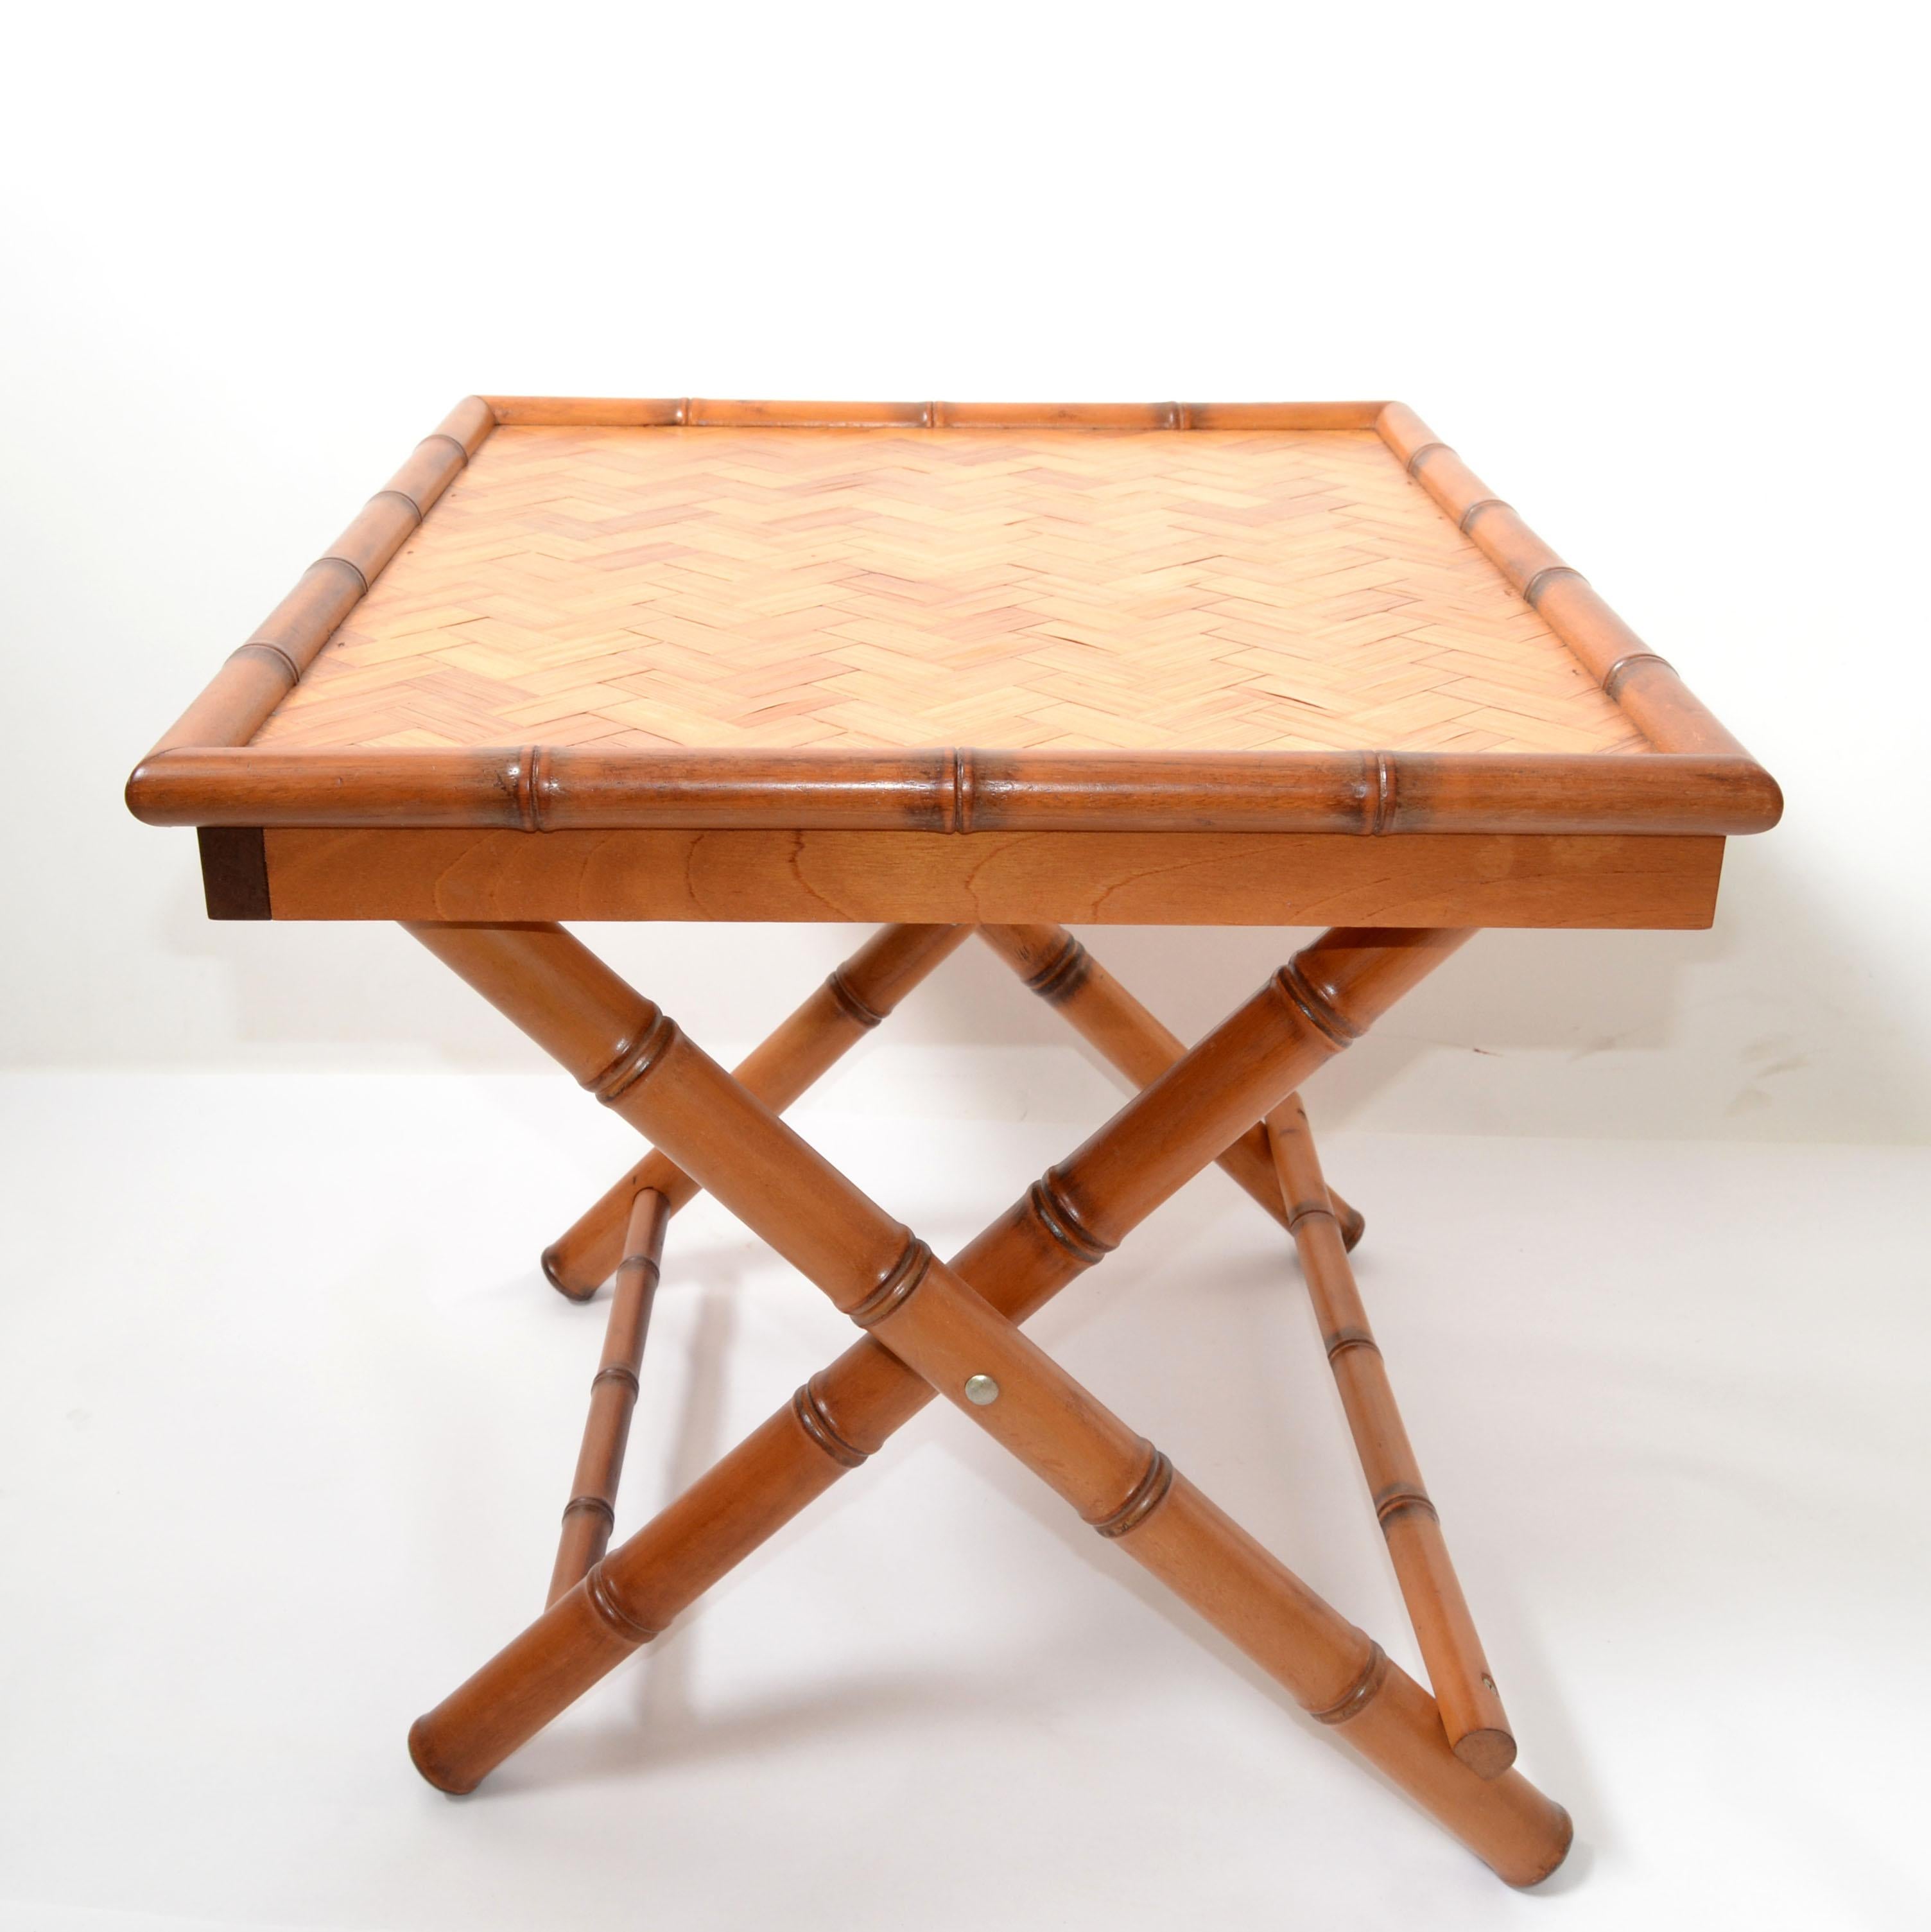 1970s Mid-Century Modern handcrafted rectangular bamboo Tilt-Top serving table.
Decorative and sturdy X-base.
The table is easy to fold and uses a small storage place. Great for Serving Your favorite Dessert.
Measurements folded: Height 26.75 x